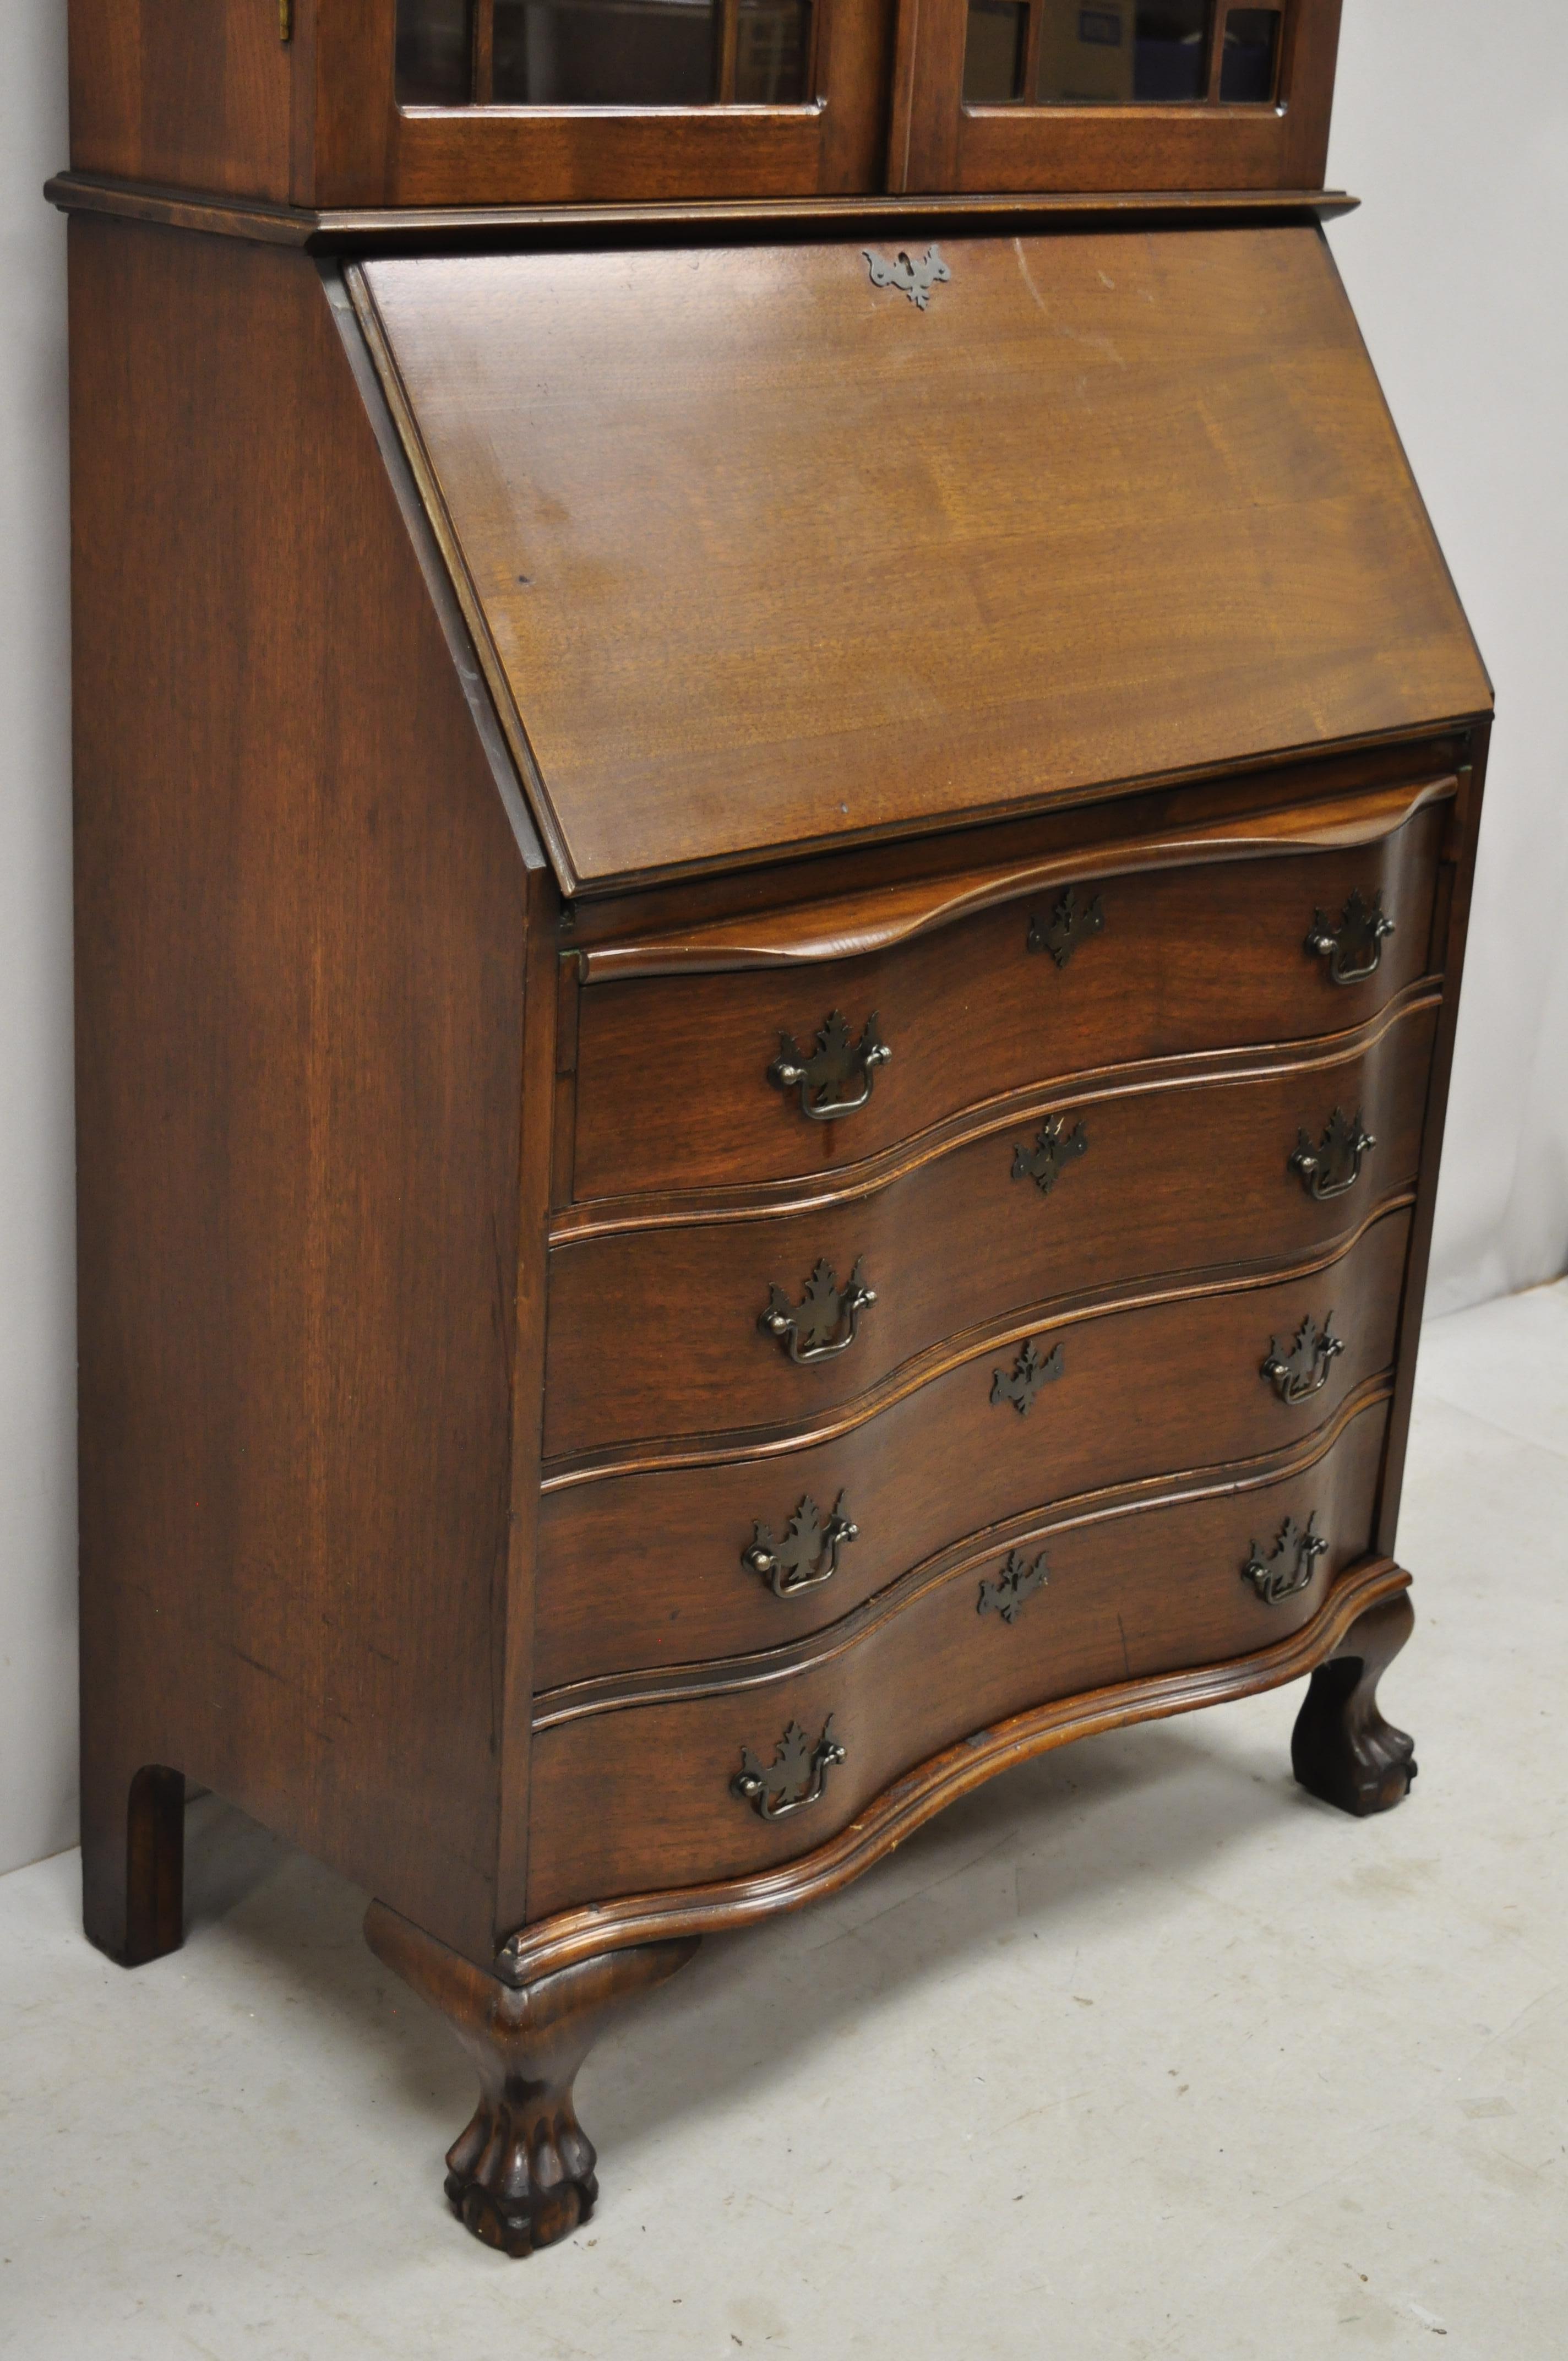 20th Century Antique Mahogany Chippendale Style Bow Front Ball and Claw Tall Secretary Desk